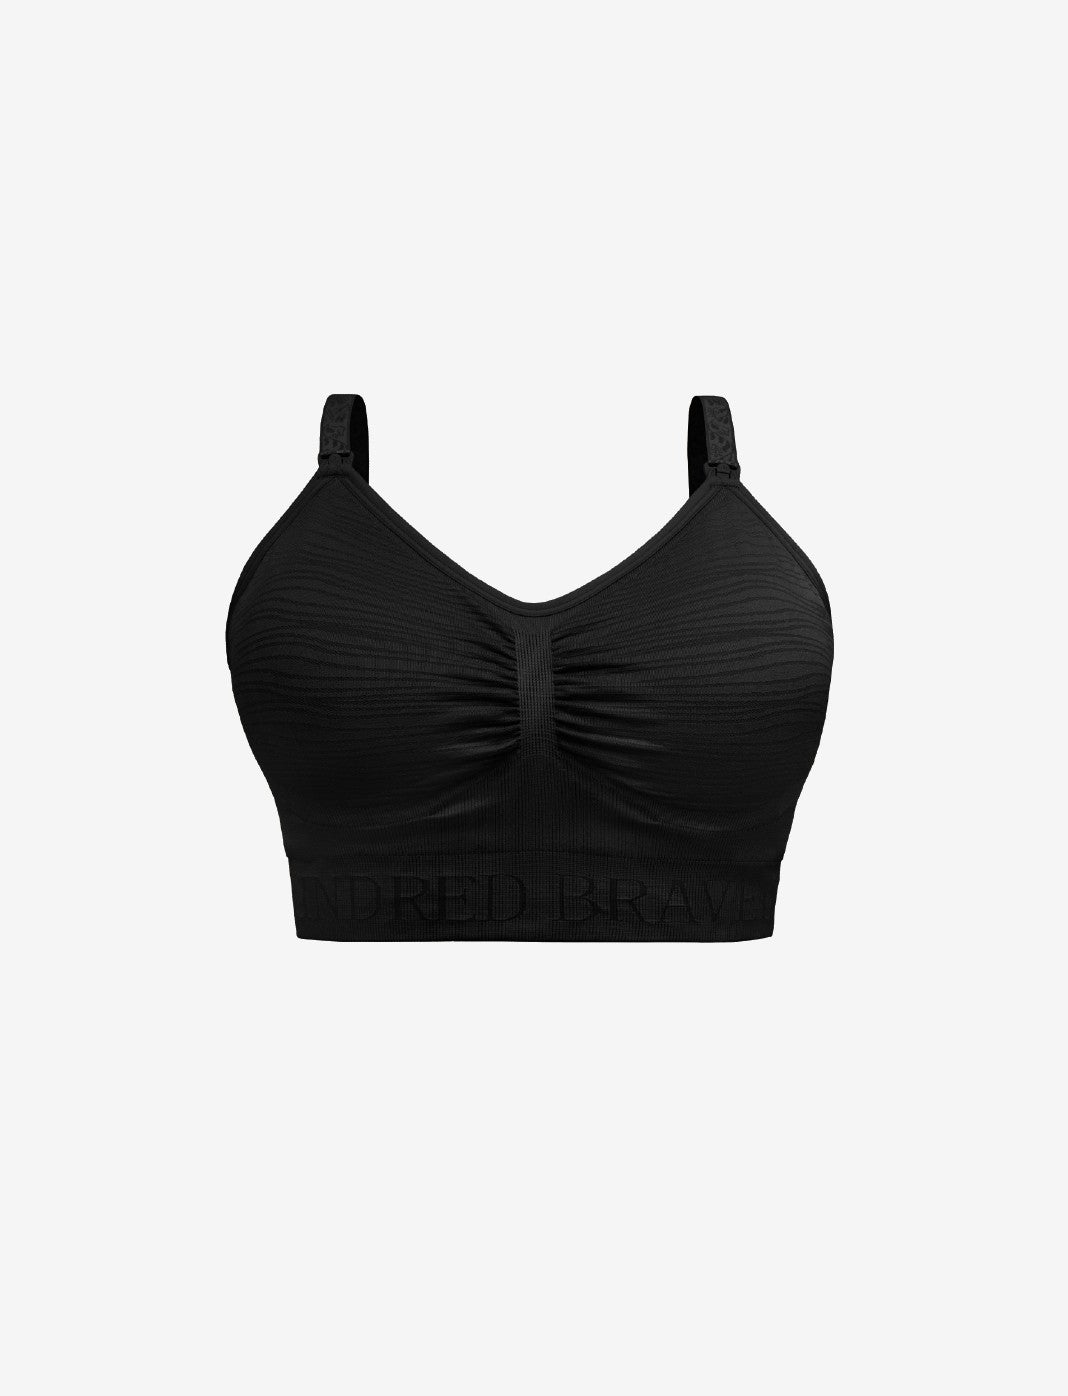 Kindred Bravely Convertible Sublime Hands-Free Pumping Bra - Black